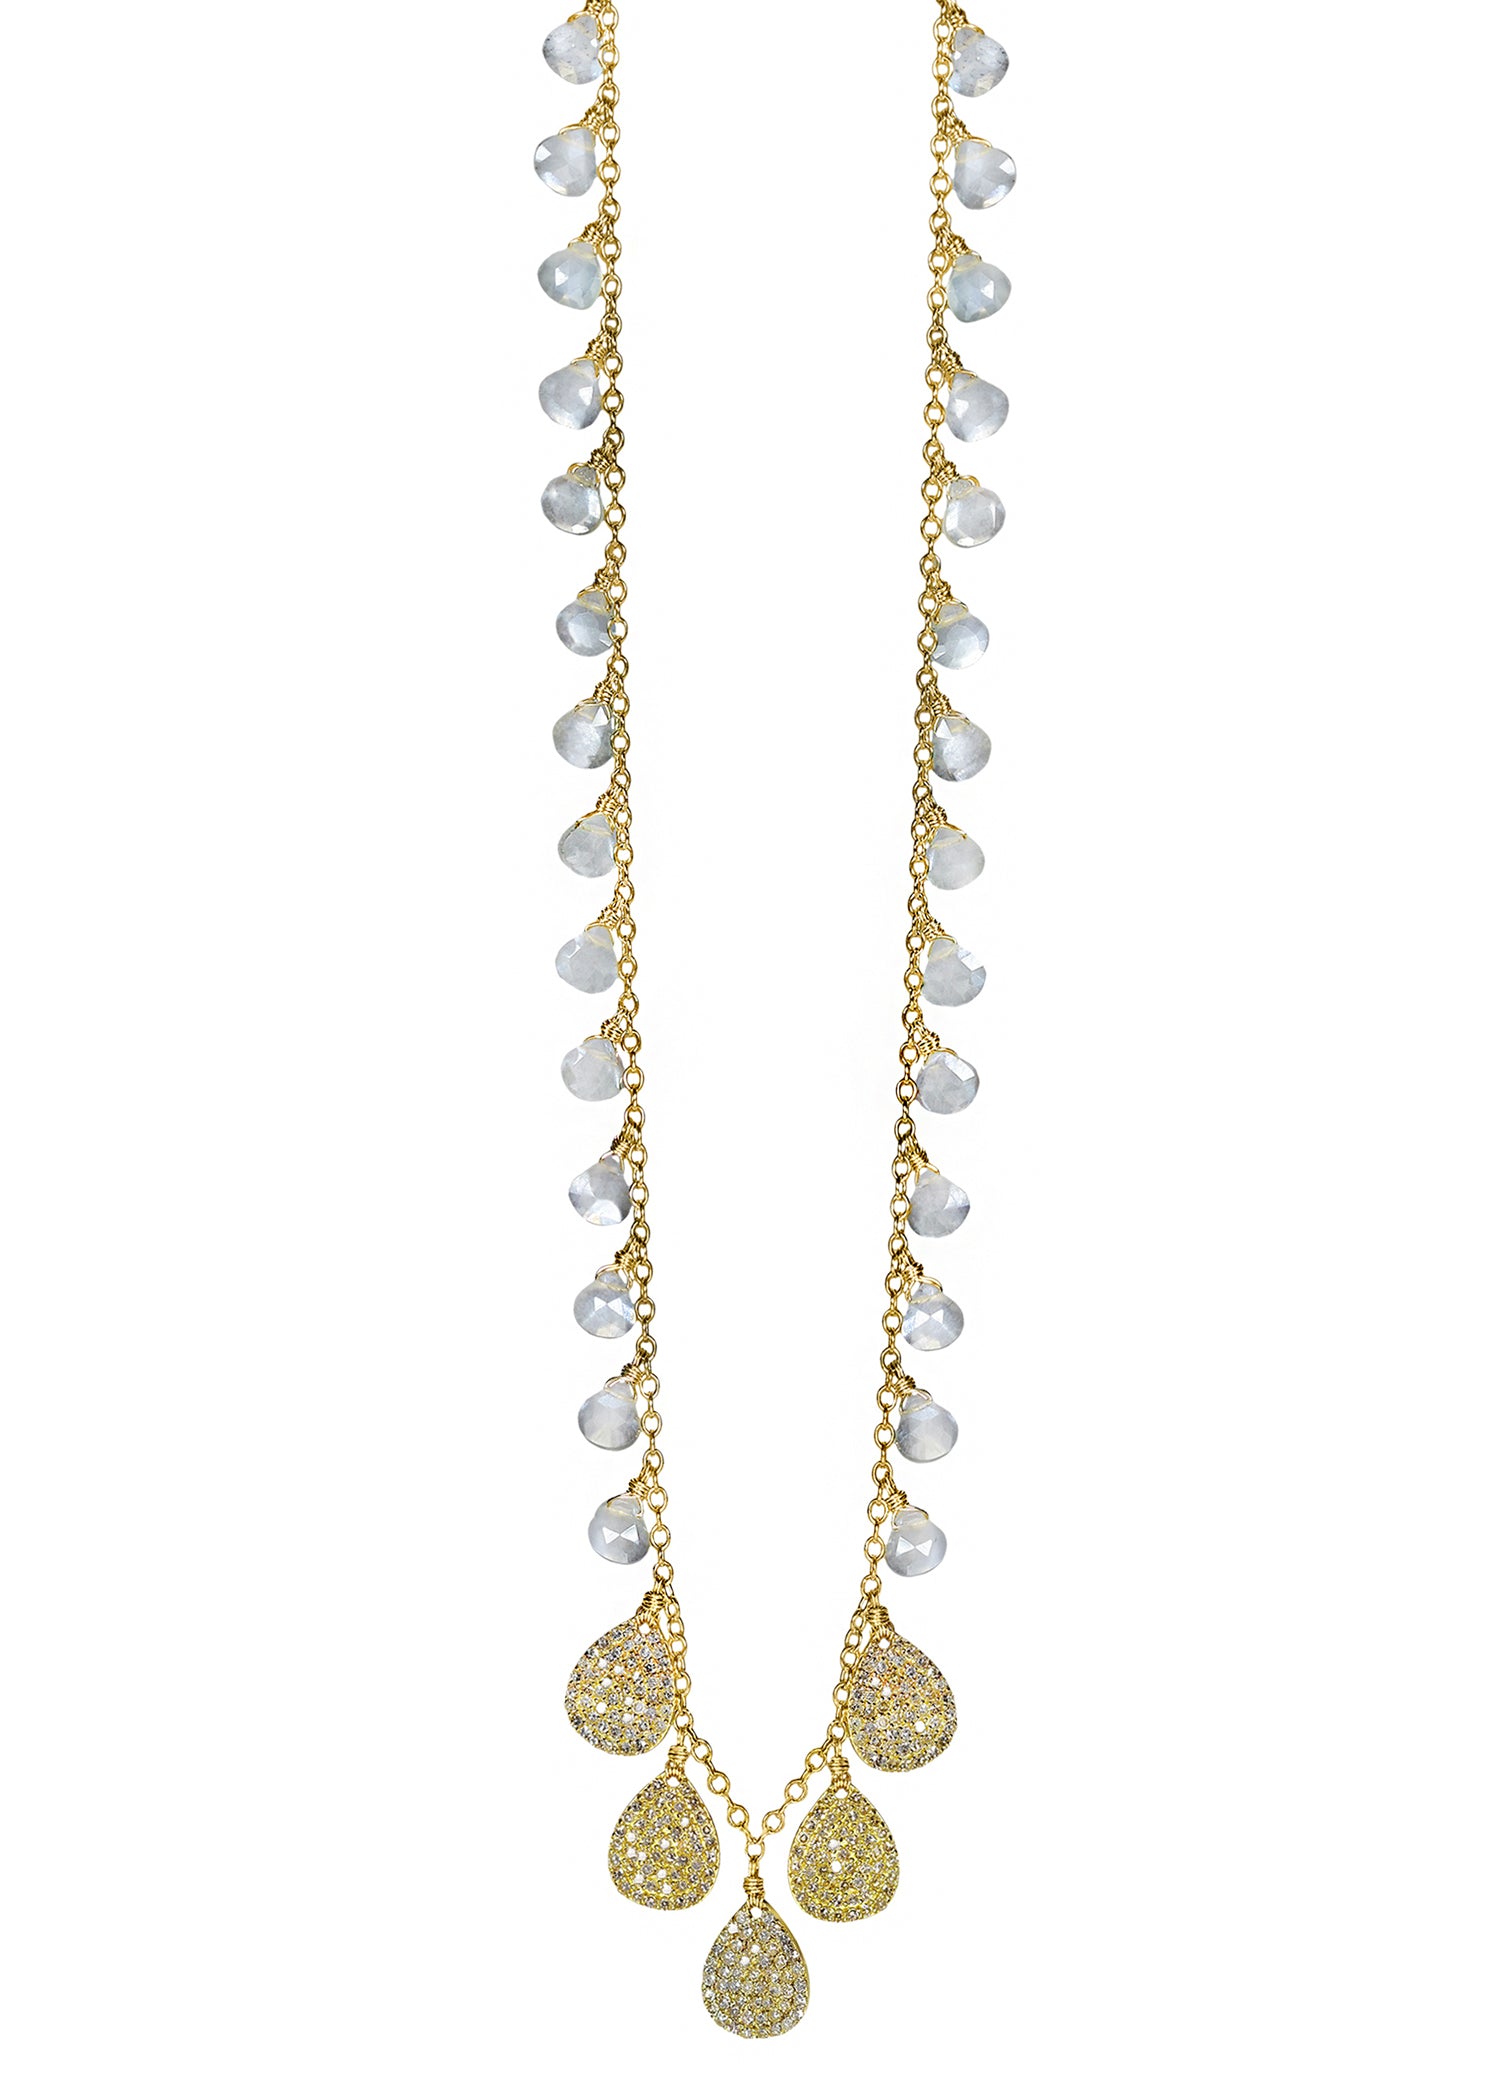 Diamond Gray moonstone 14k gold Special order only Handmade in our Los Angeles studio 